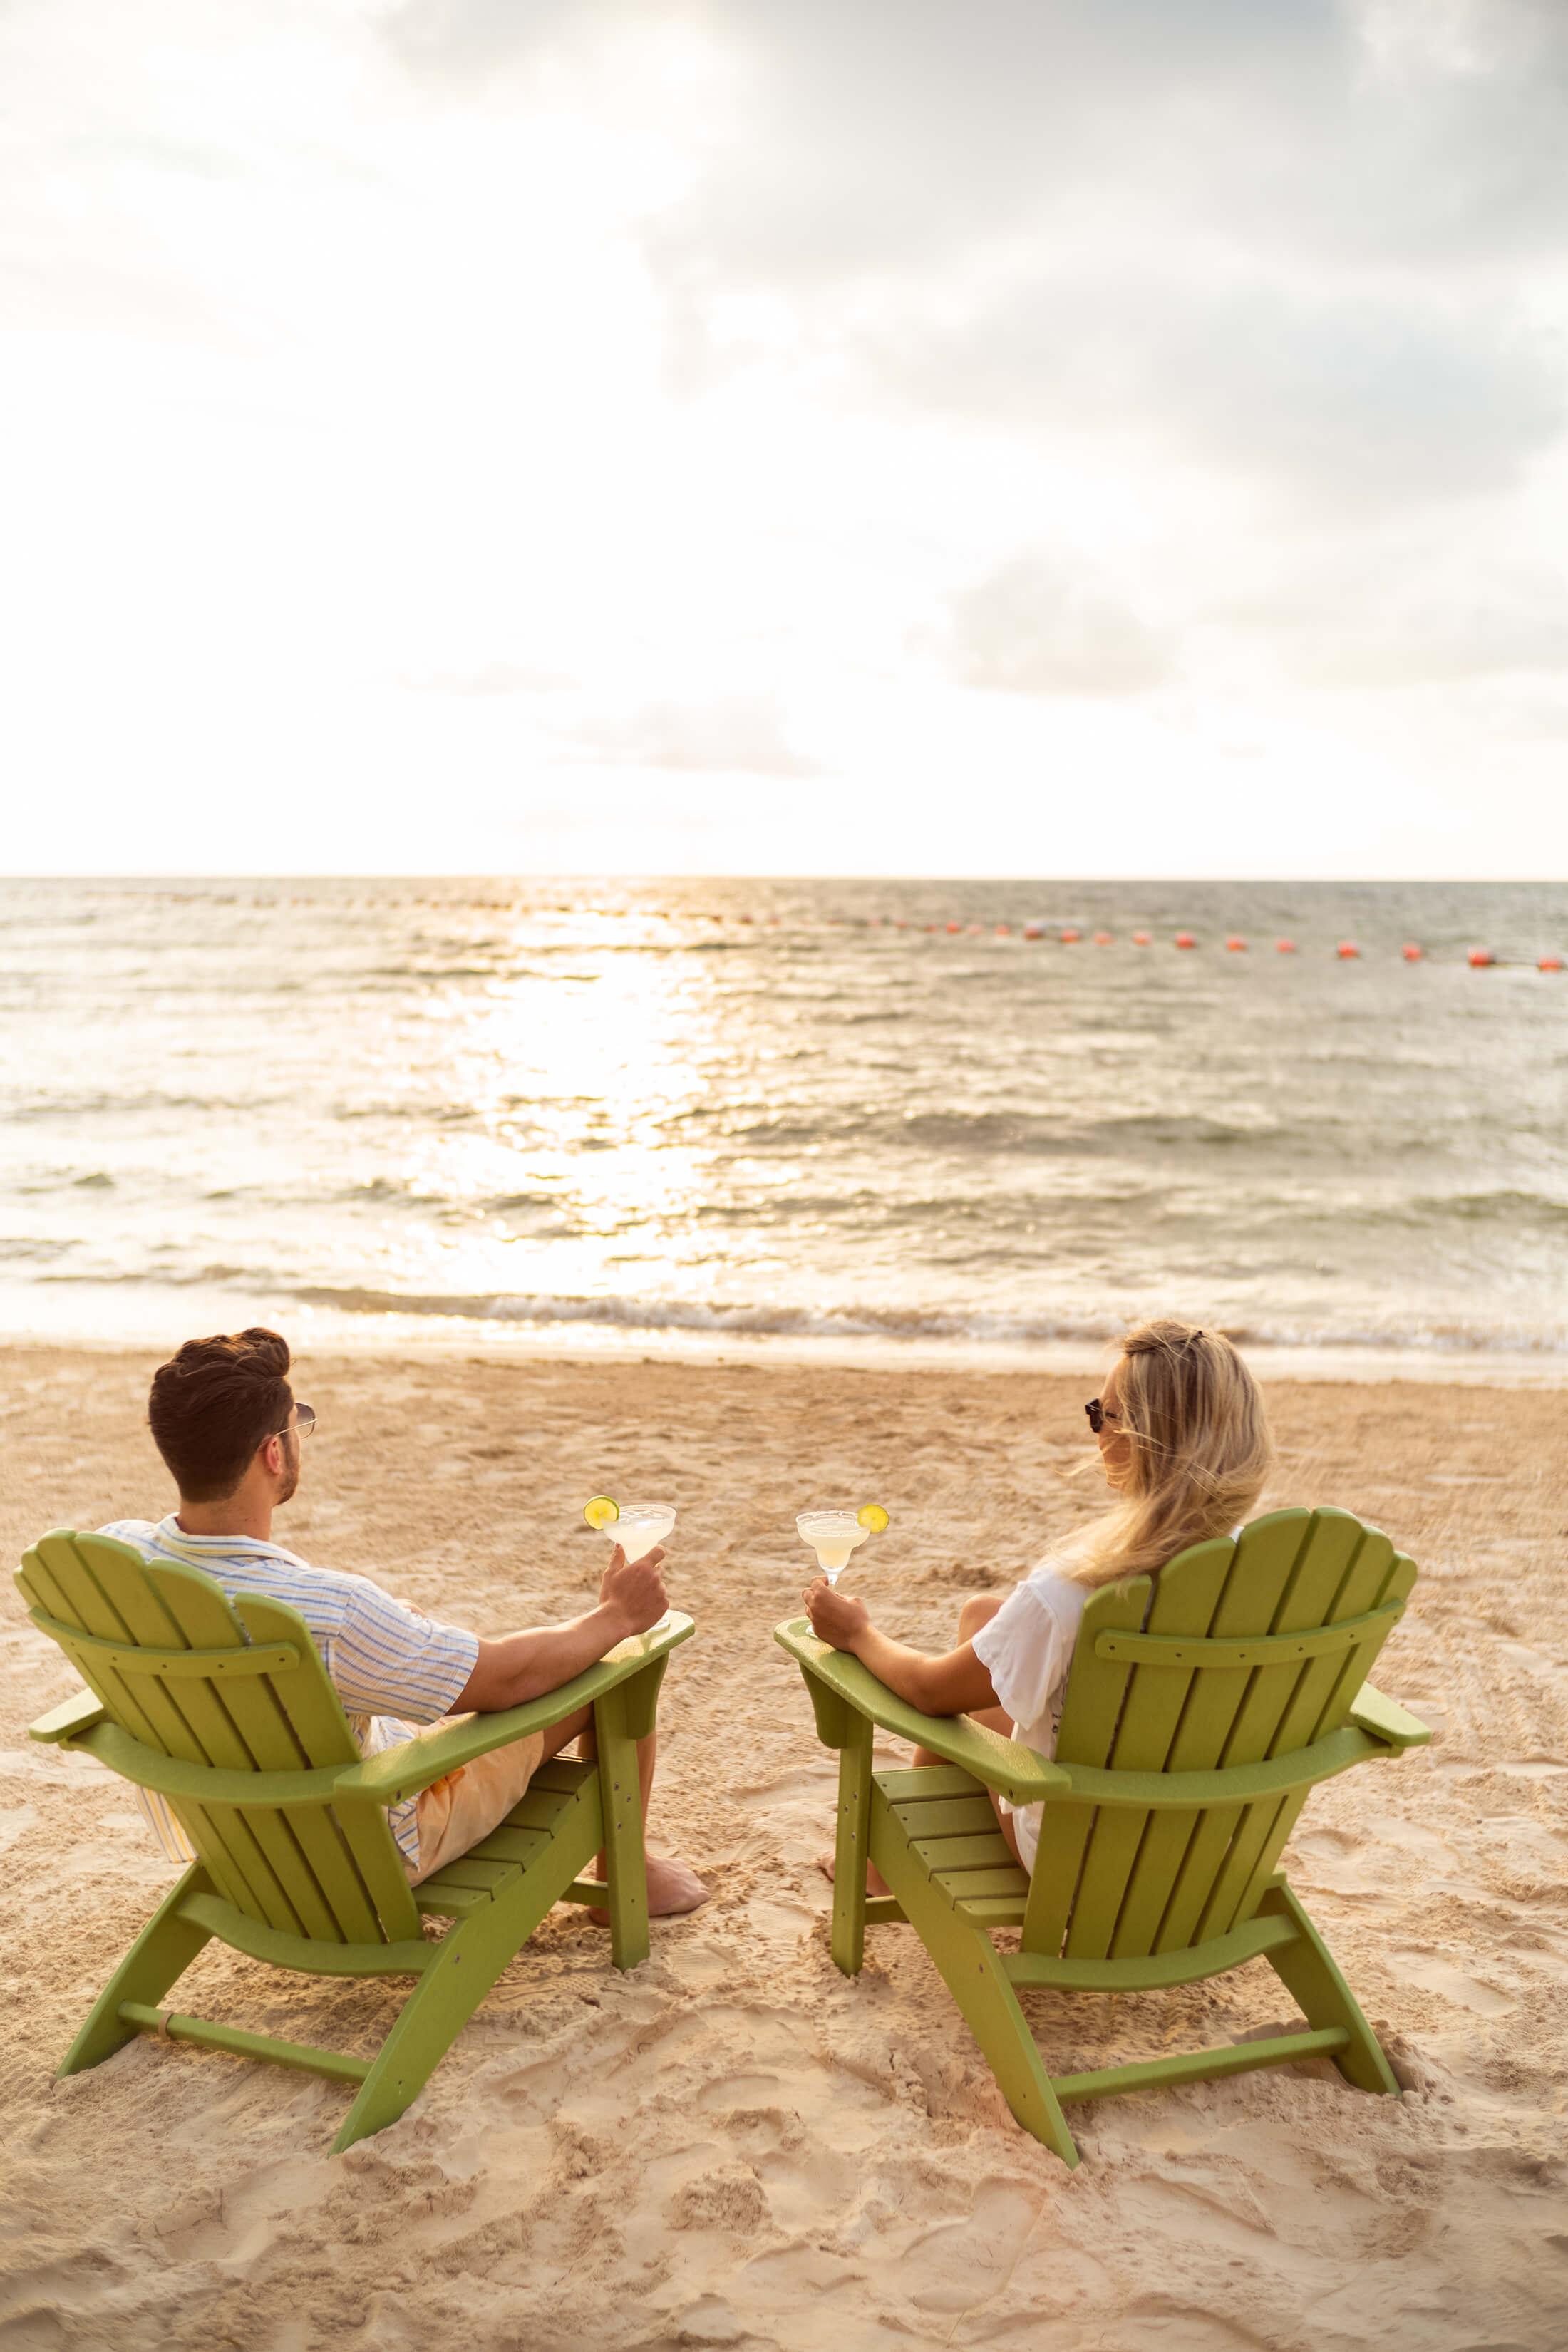 A couple enjoys margaritas while watching the sunset on the beach